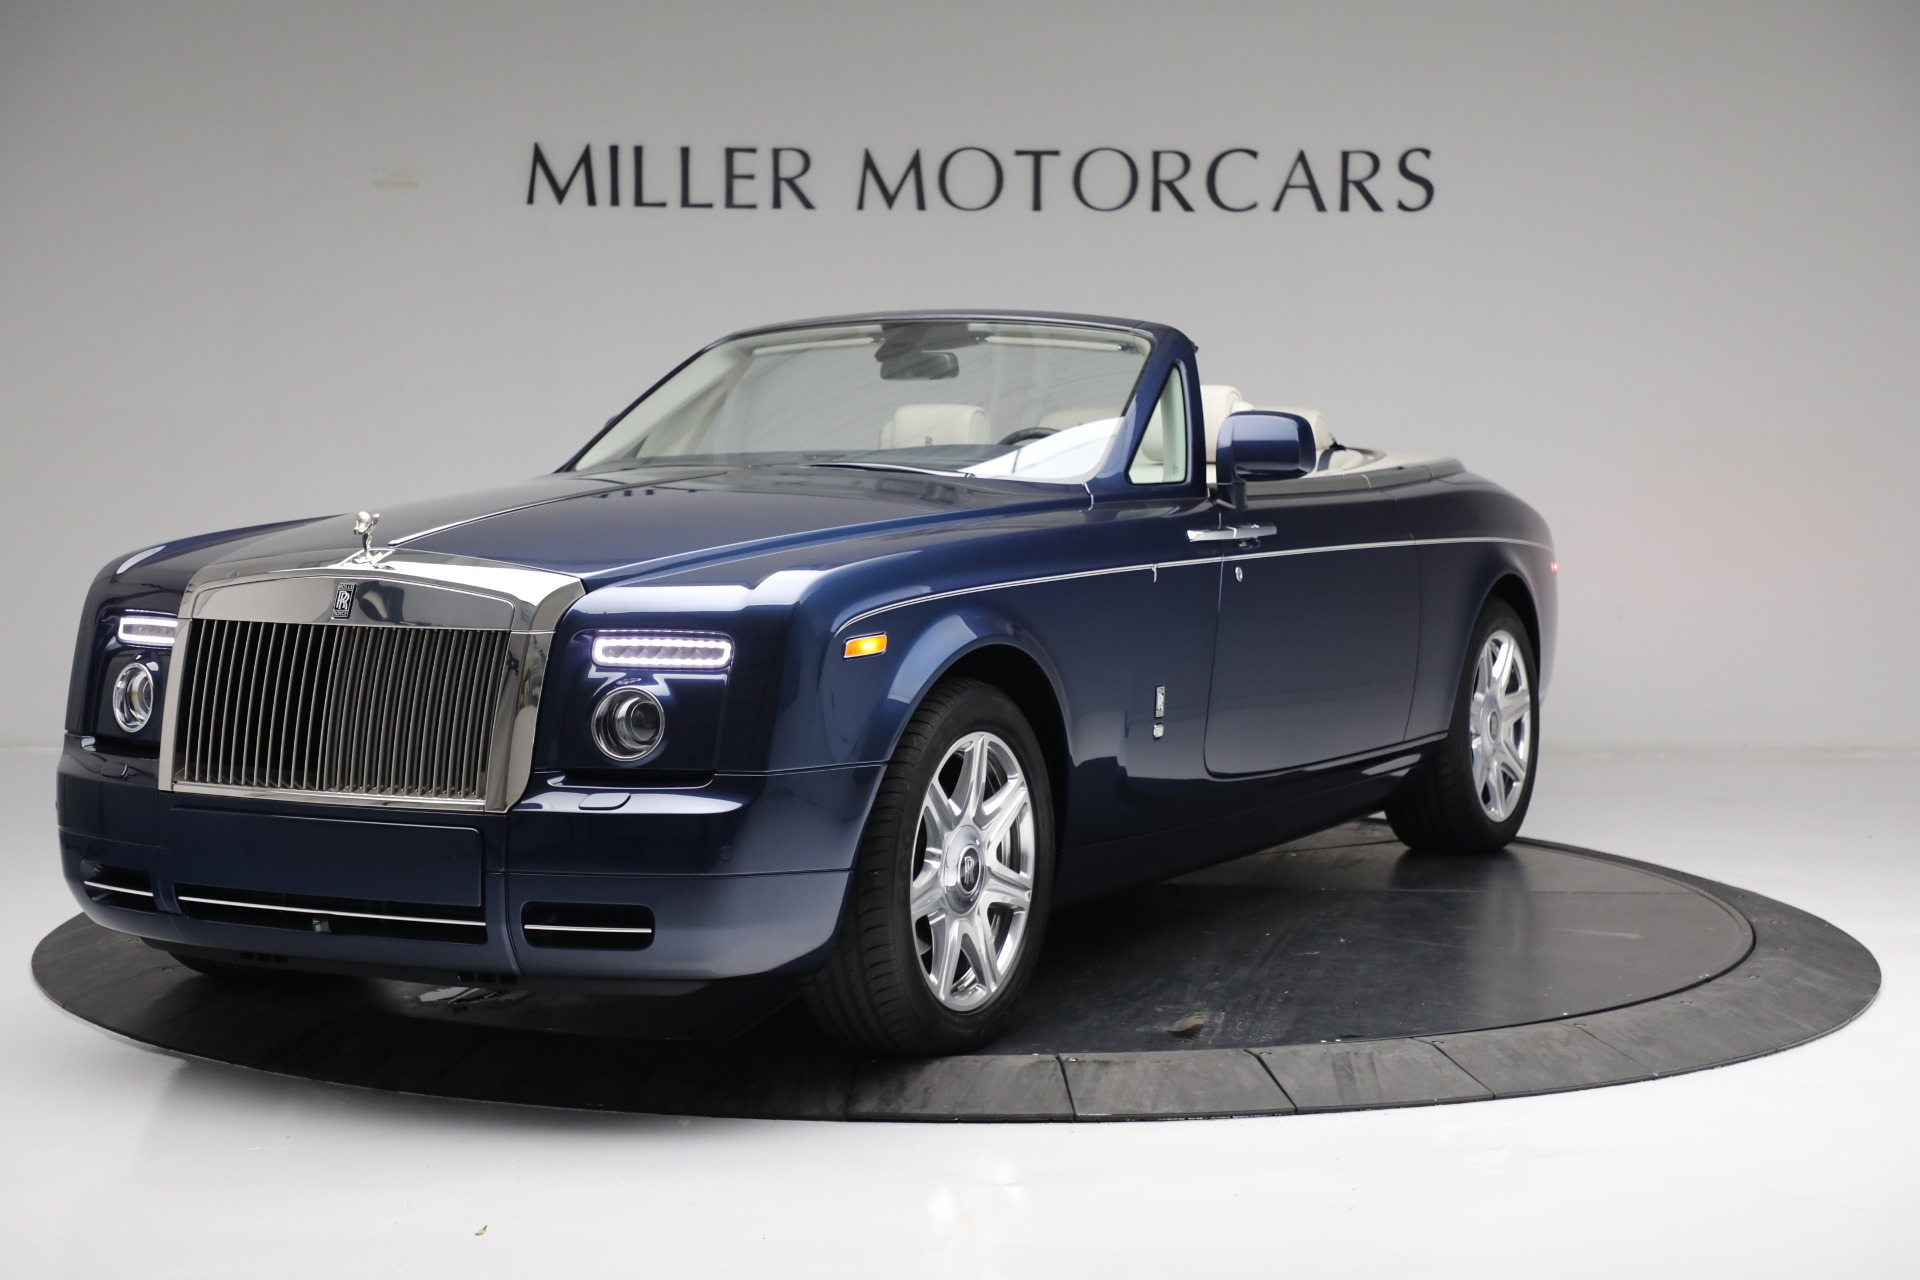 2016 RollsRoyce Phantom Drophead Coupe Convertible Latest Prices  Reviews Specs Photos and Incentives  Autoblog